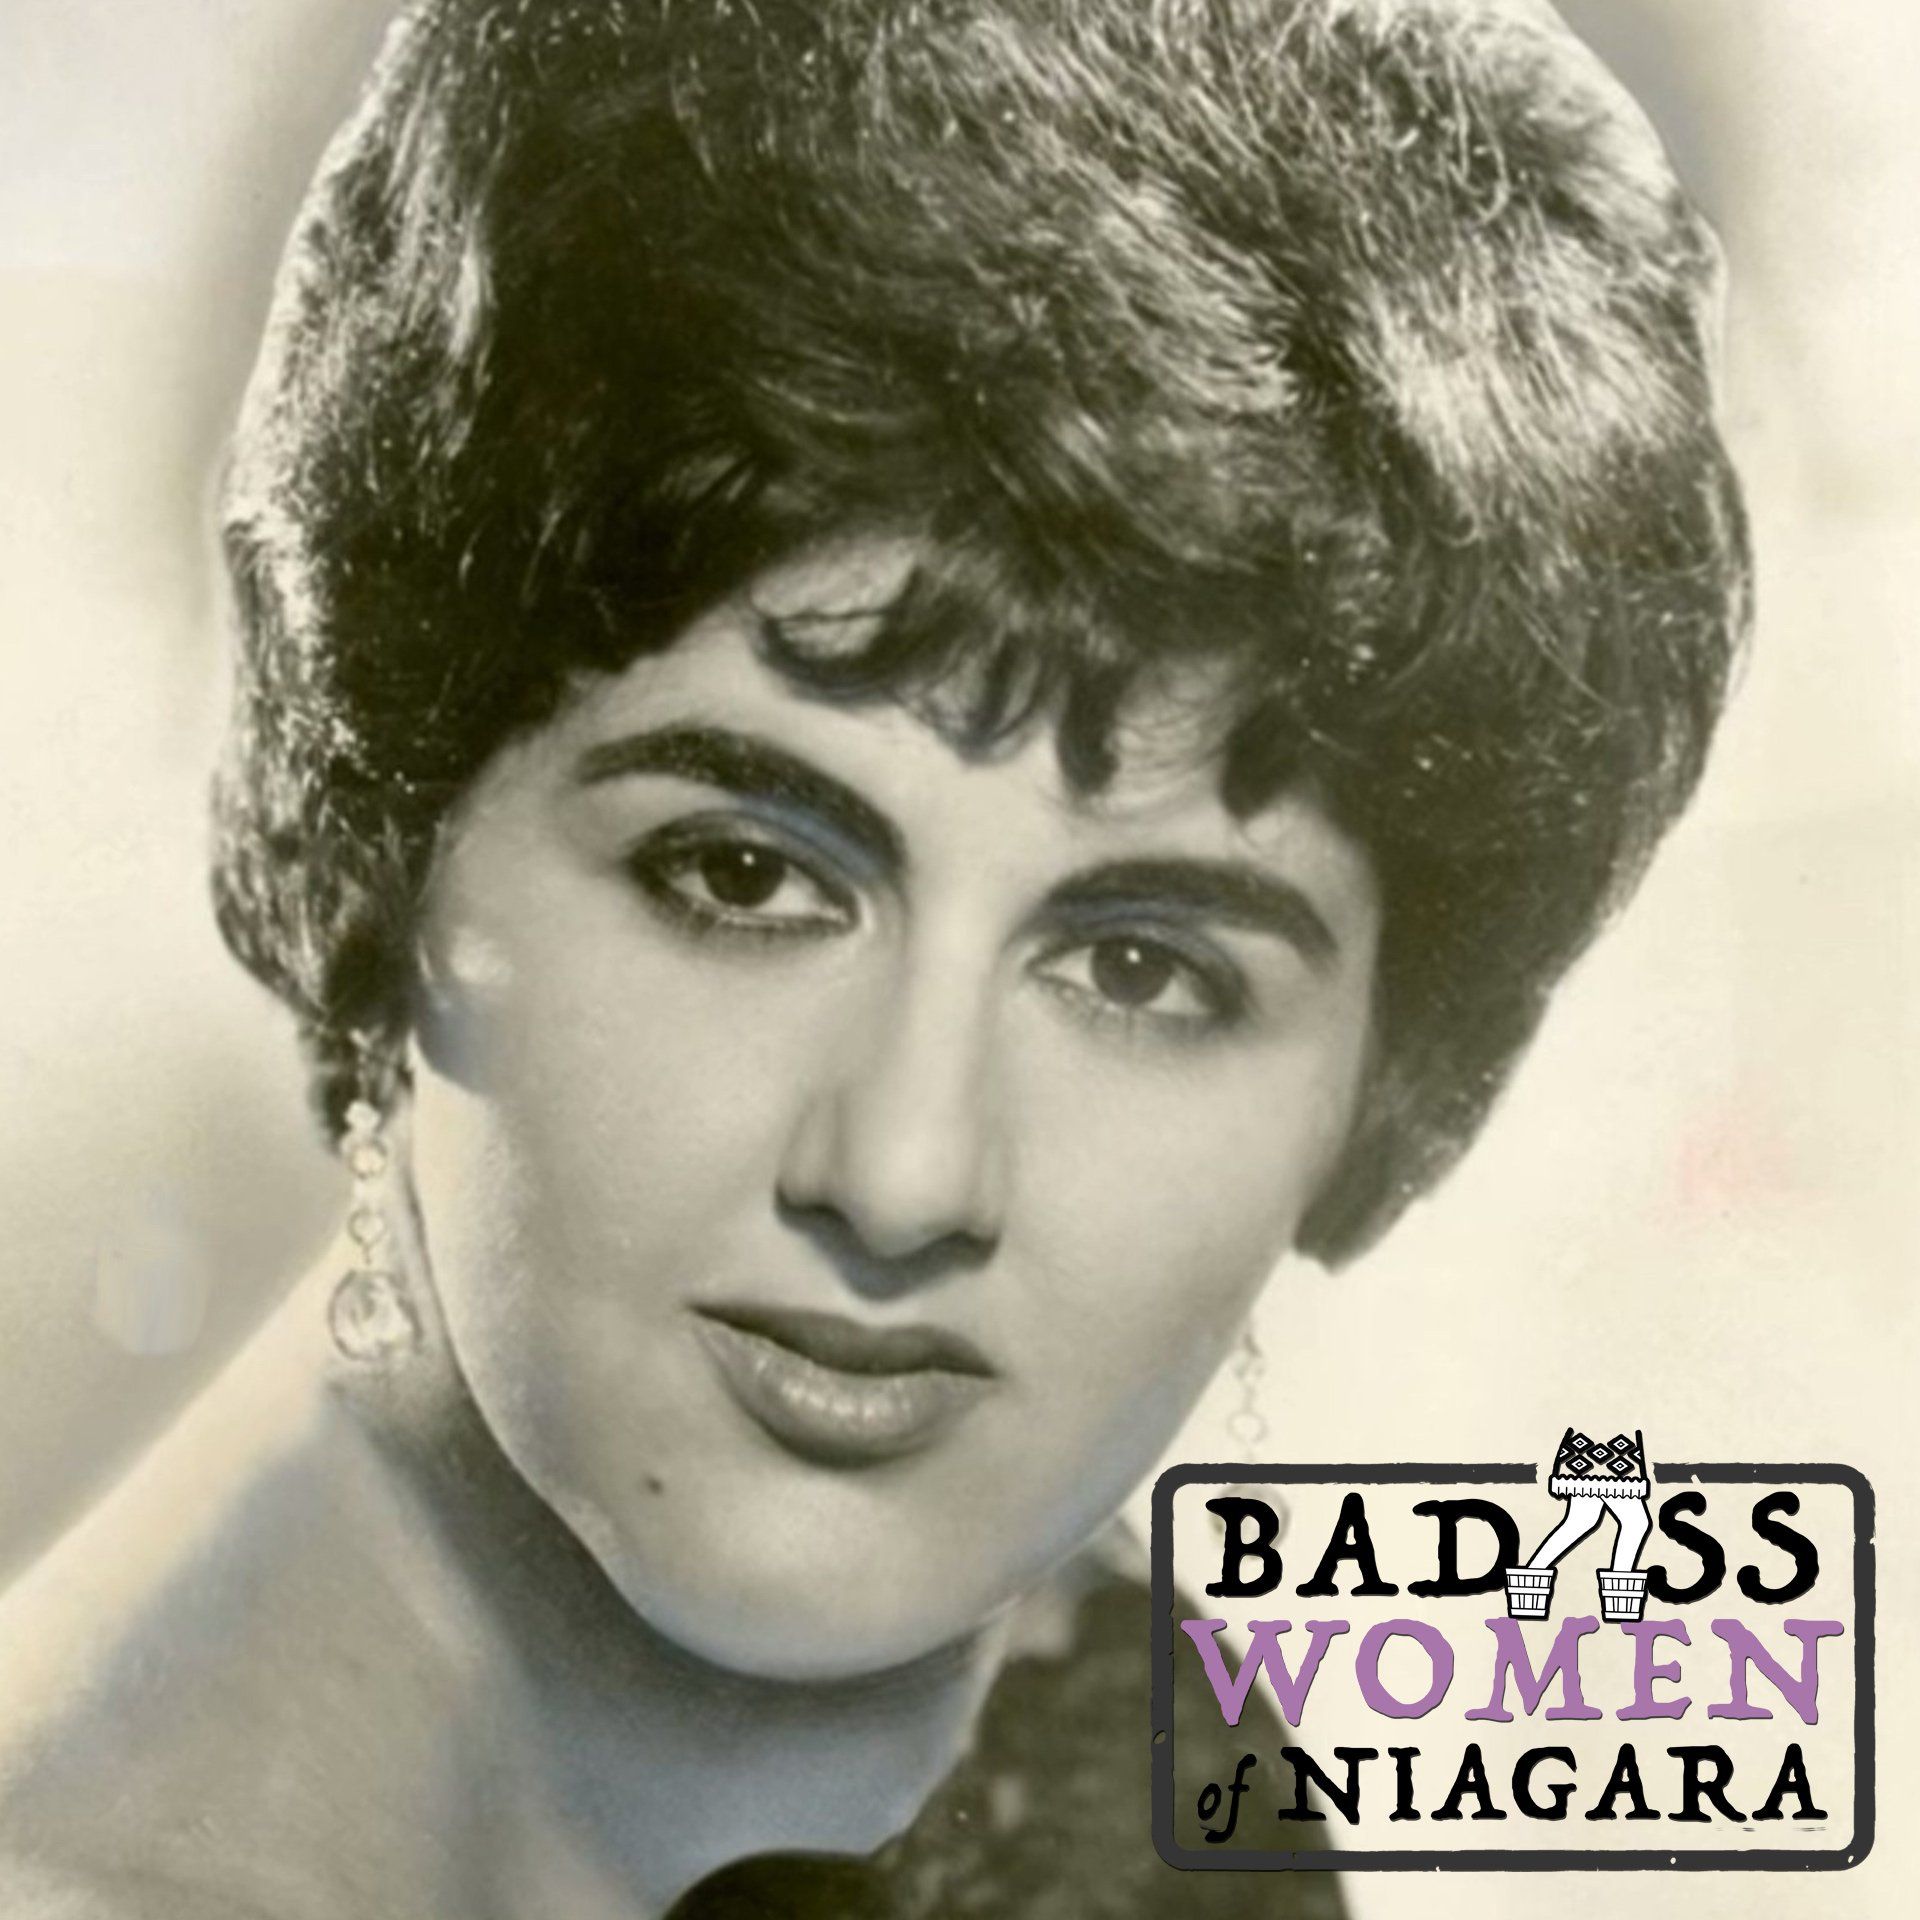 A Niagara Falls native, Lillian Garabedian was the winner of the Voices of Tomorrow singing contest in 1955. Her focus was in dramatic opera and studied at Fredonia State College. After her studies at Fredonia she was awarded a teaching fellowship and pursued her masters at Indiana University and in 1959 she went on to study in Germany under a Fulbright grant. Her professional career includes solo performances with the Bavarian State Opera, singing with the Buffalo Philharmonic Orchestra, appearances in the famous Munich festivals, and the Marlboro festival in 1963. Garabedian tragically died in a plane crash as she was en route to a concert in South Carolina in 1965. Her death was mourned by many local residents as well as people she touched with her signing wherever she performed.